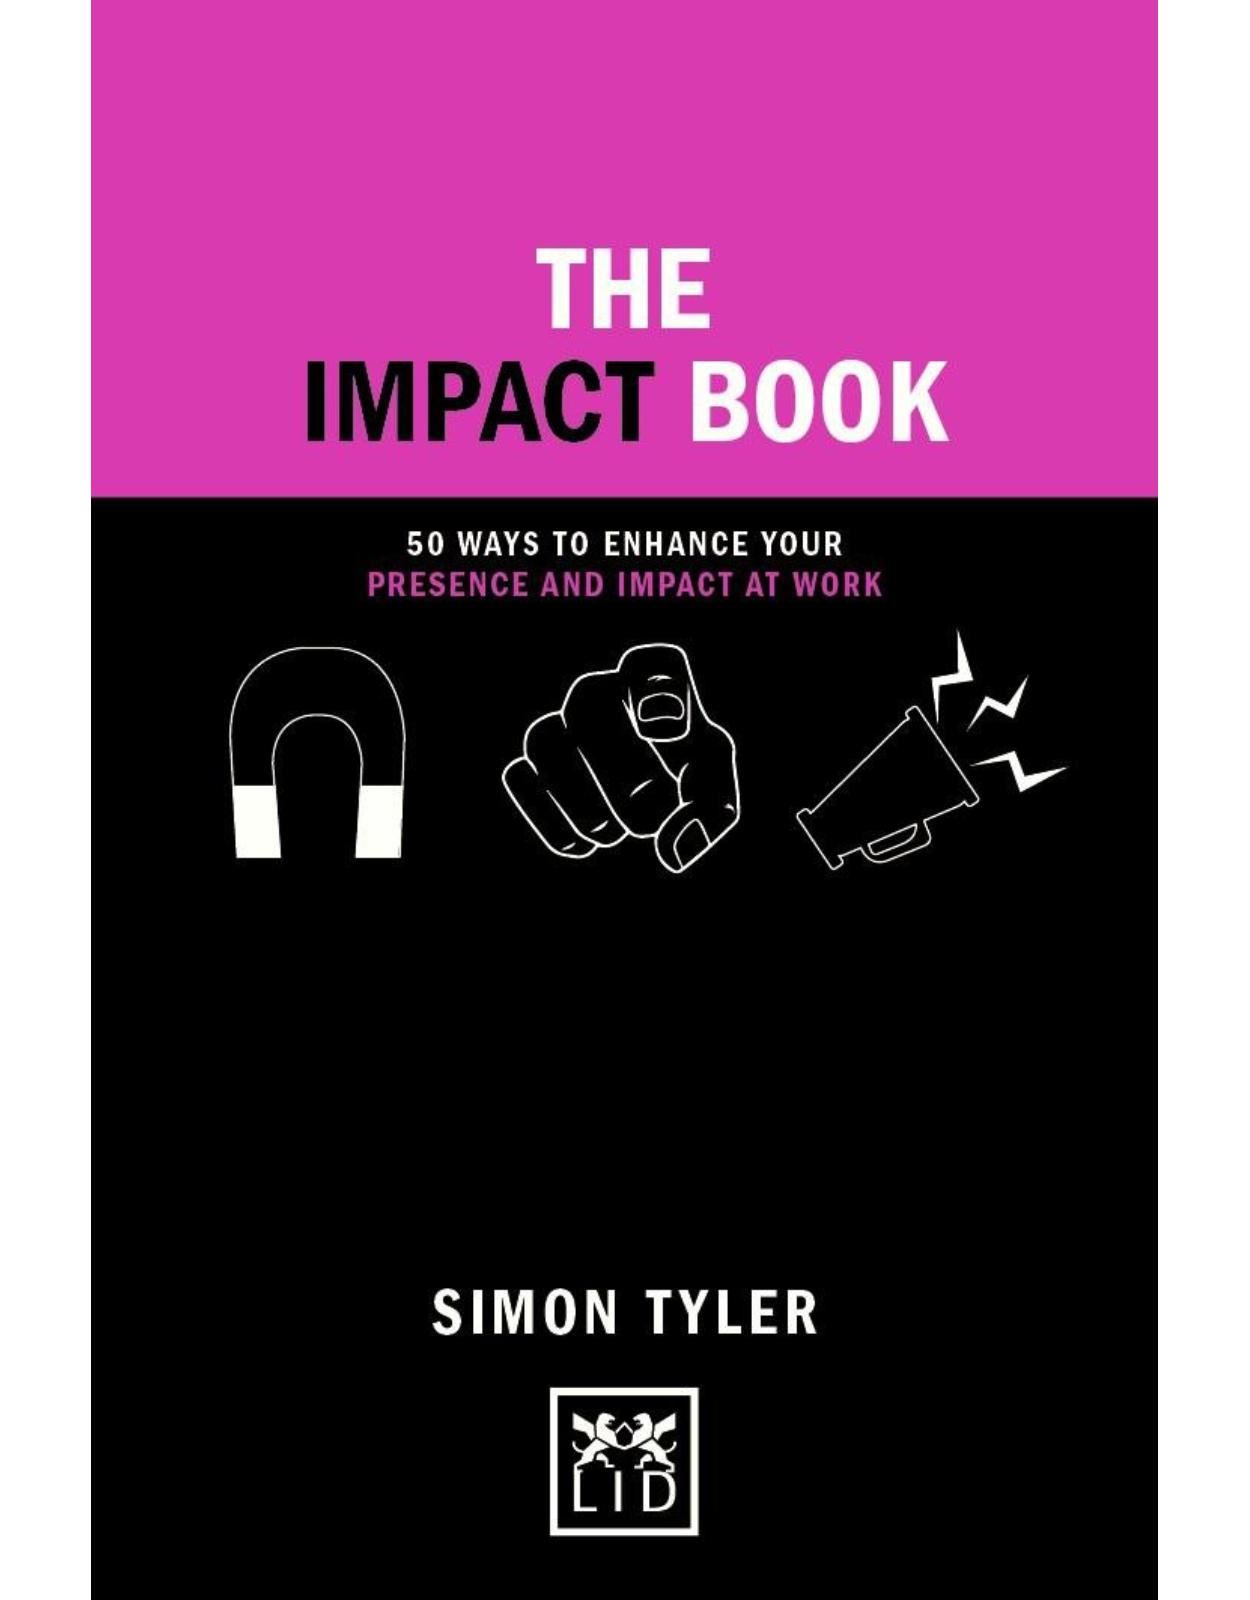 The Impact Book: 50 ways to enhance your presence and impact at work